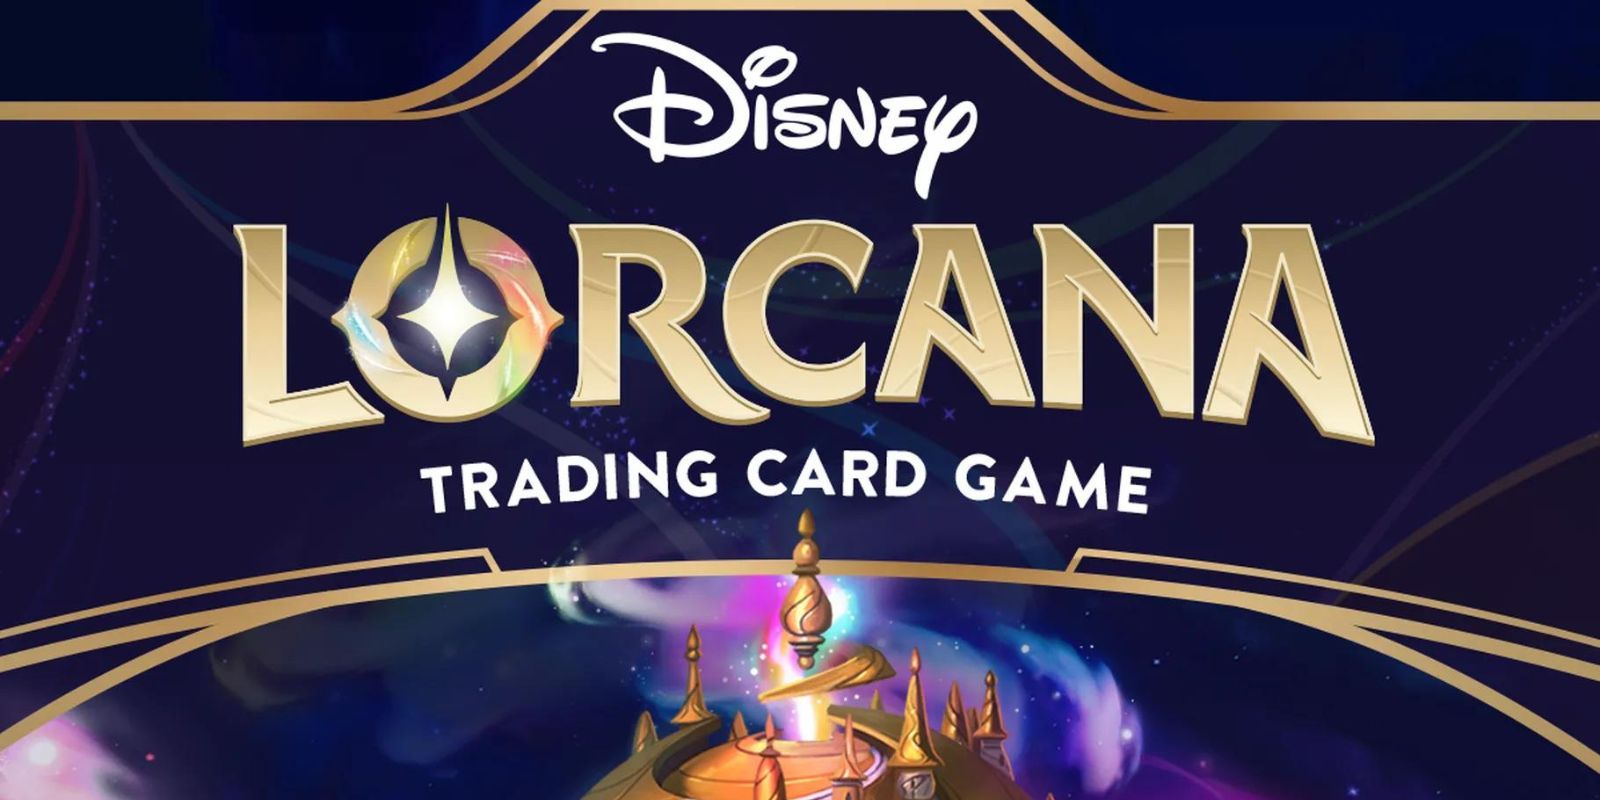 Official art for the Disney Lorcana trading card game